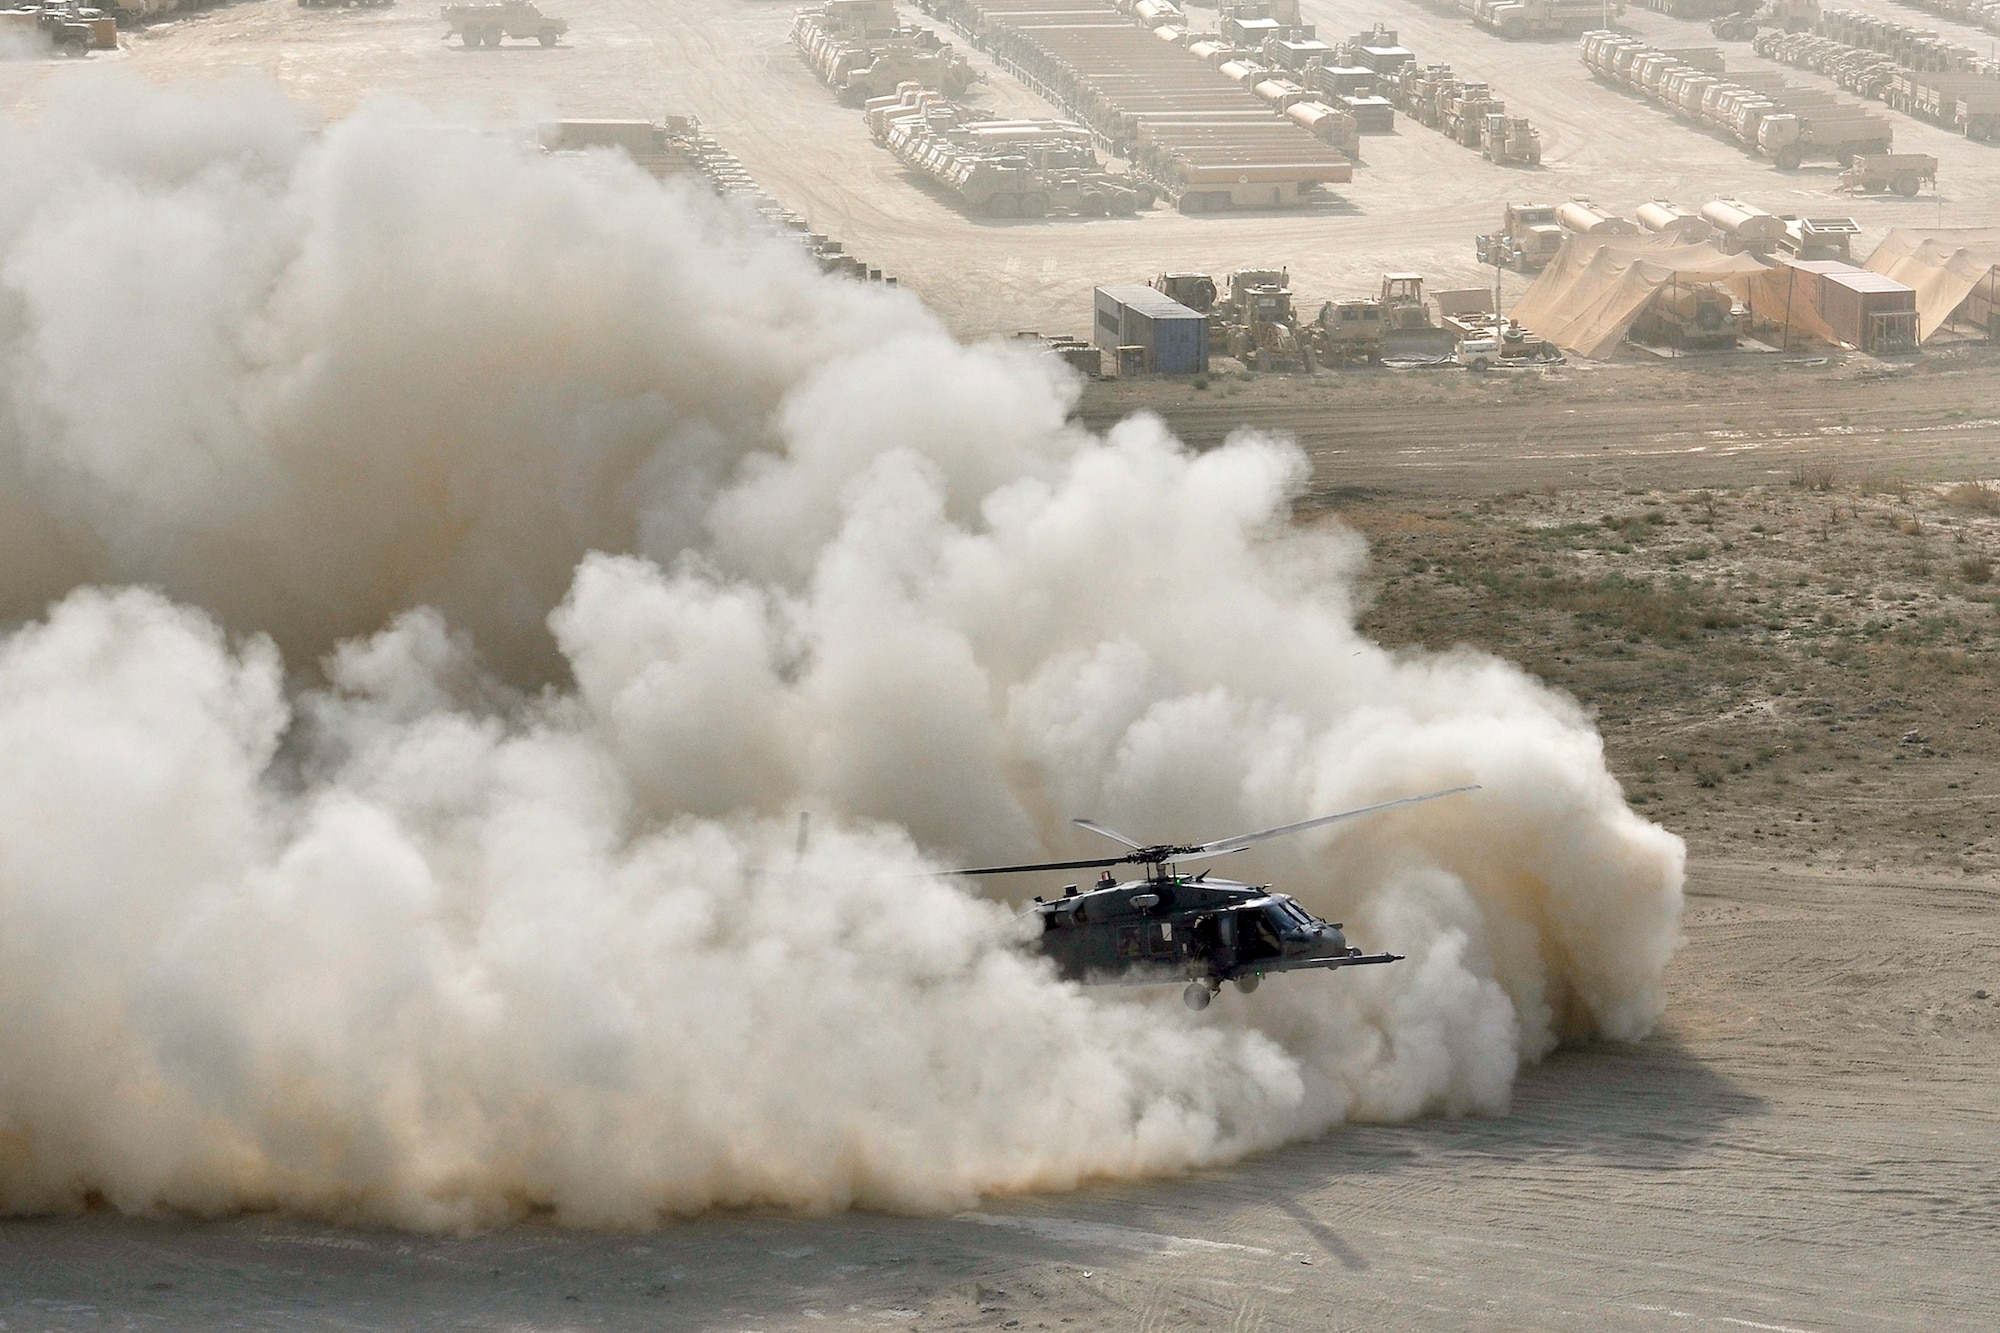 An HH-60G Pave Hawk helicopter assigned to the 33rd Expeditionary Rescue Squadron performs a brown out landing Sept. 24, 2010, at Bagram Airfield, Afghanistan. (U.S. Air Force photo/Staff Sgt. Christopher Boitz)